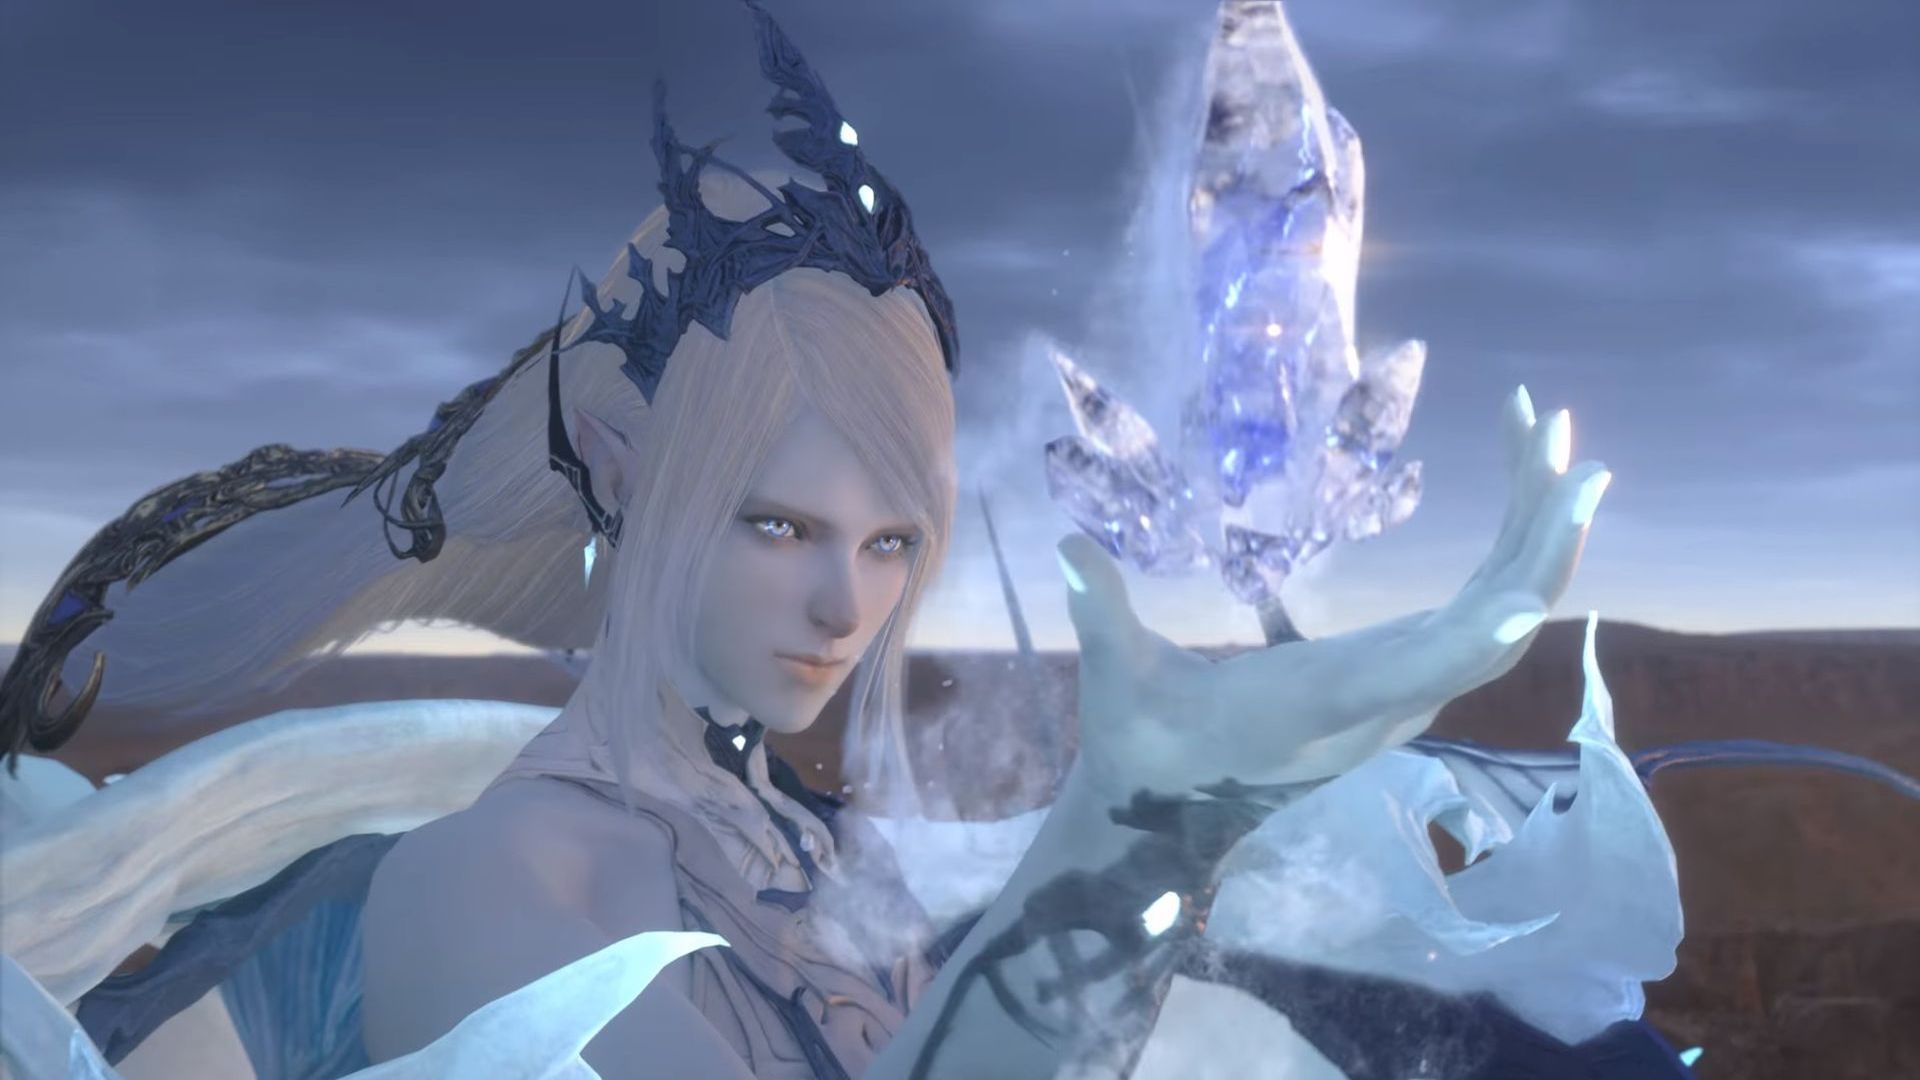 Nine features we'd love to see in Final Fantasy XVI